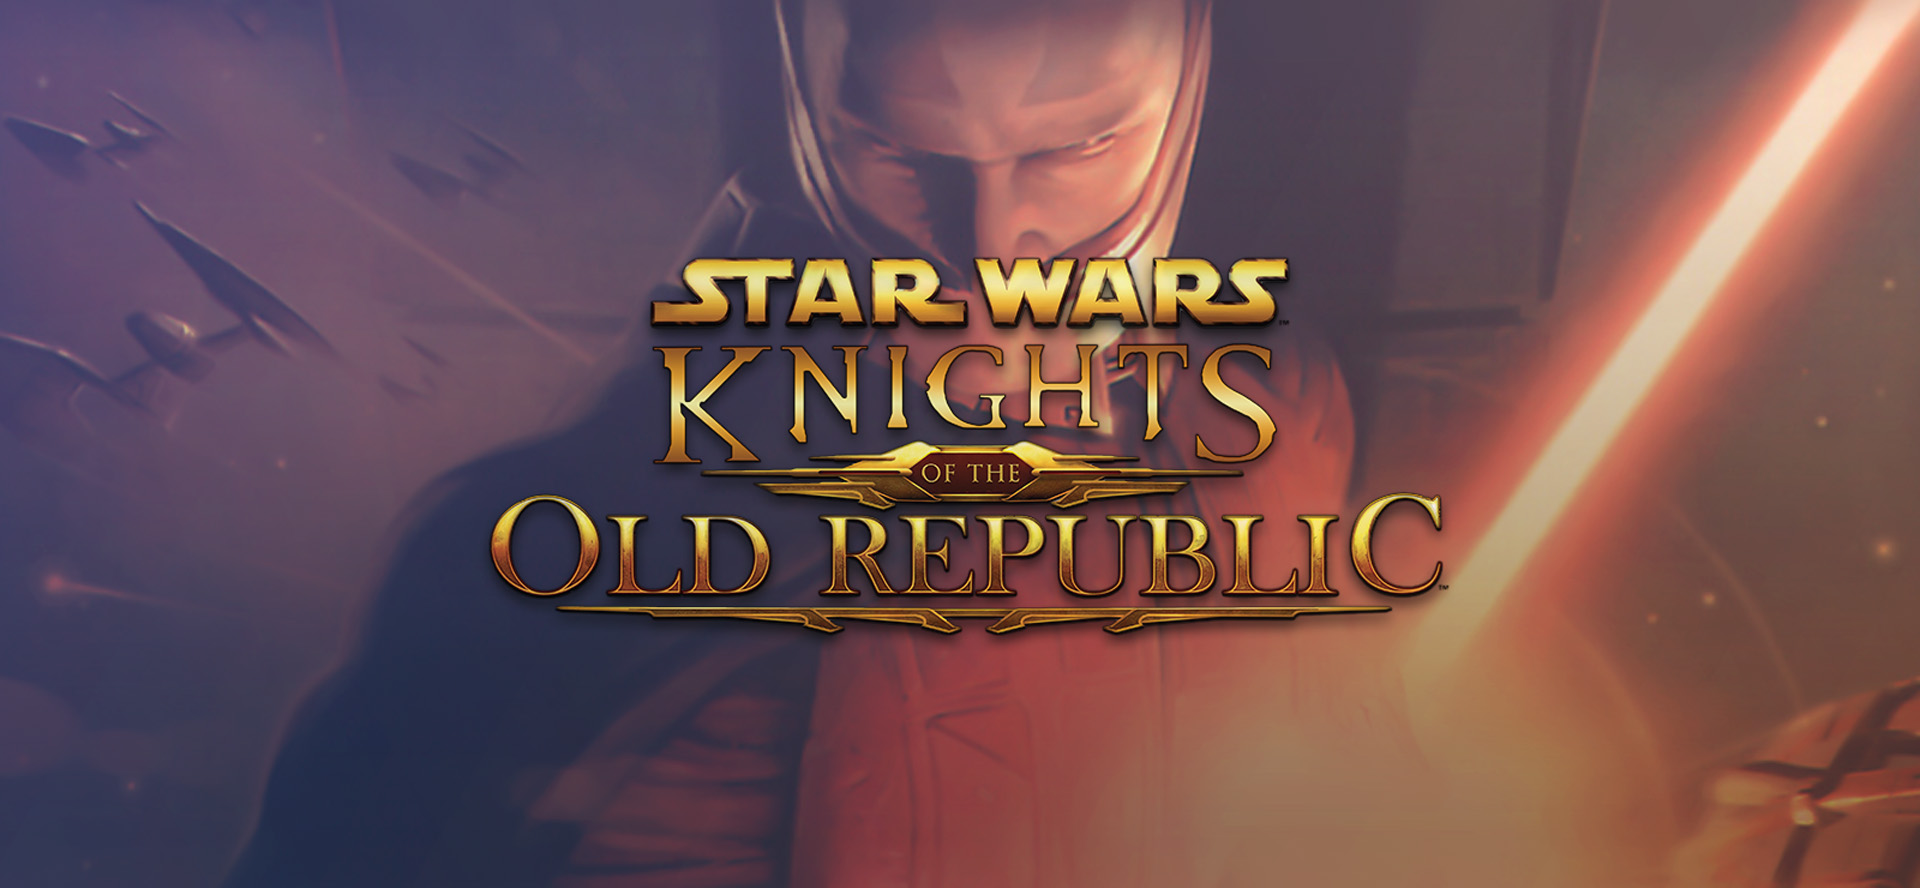 Star Wars: Knights Of The Old Republic #8